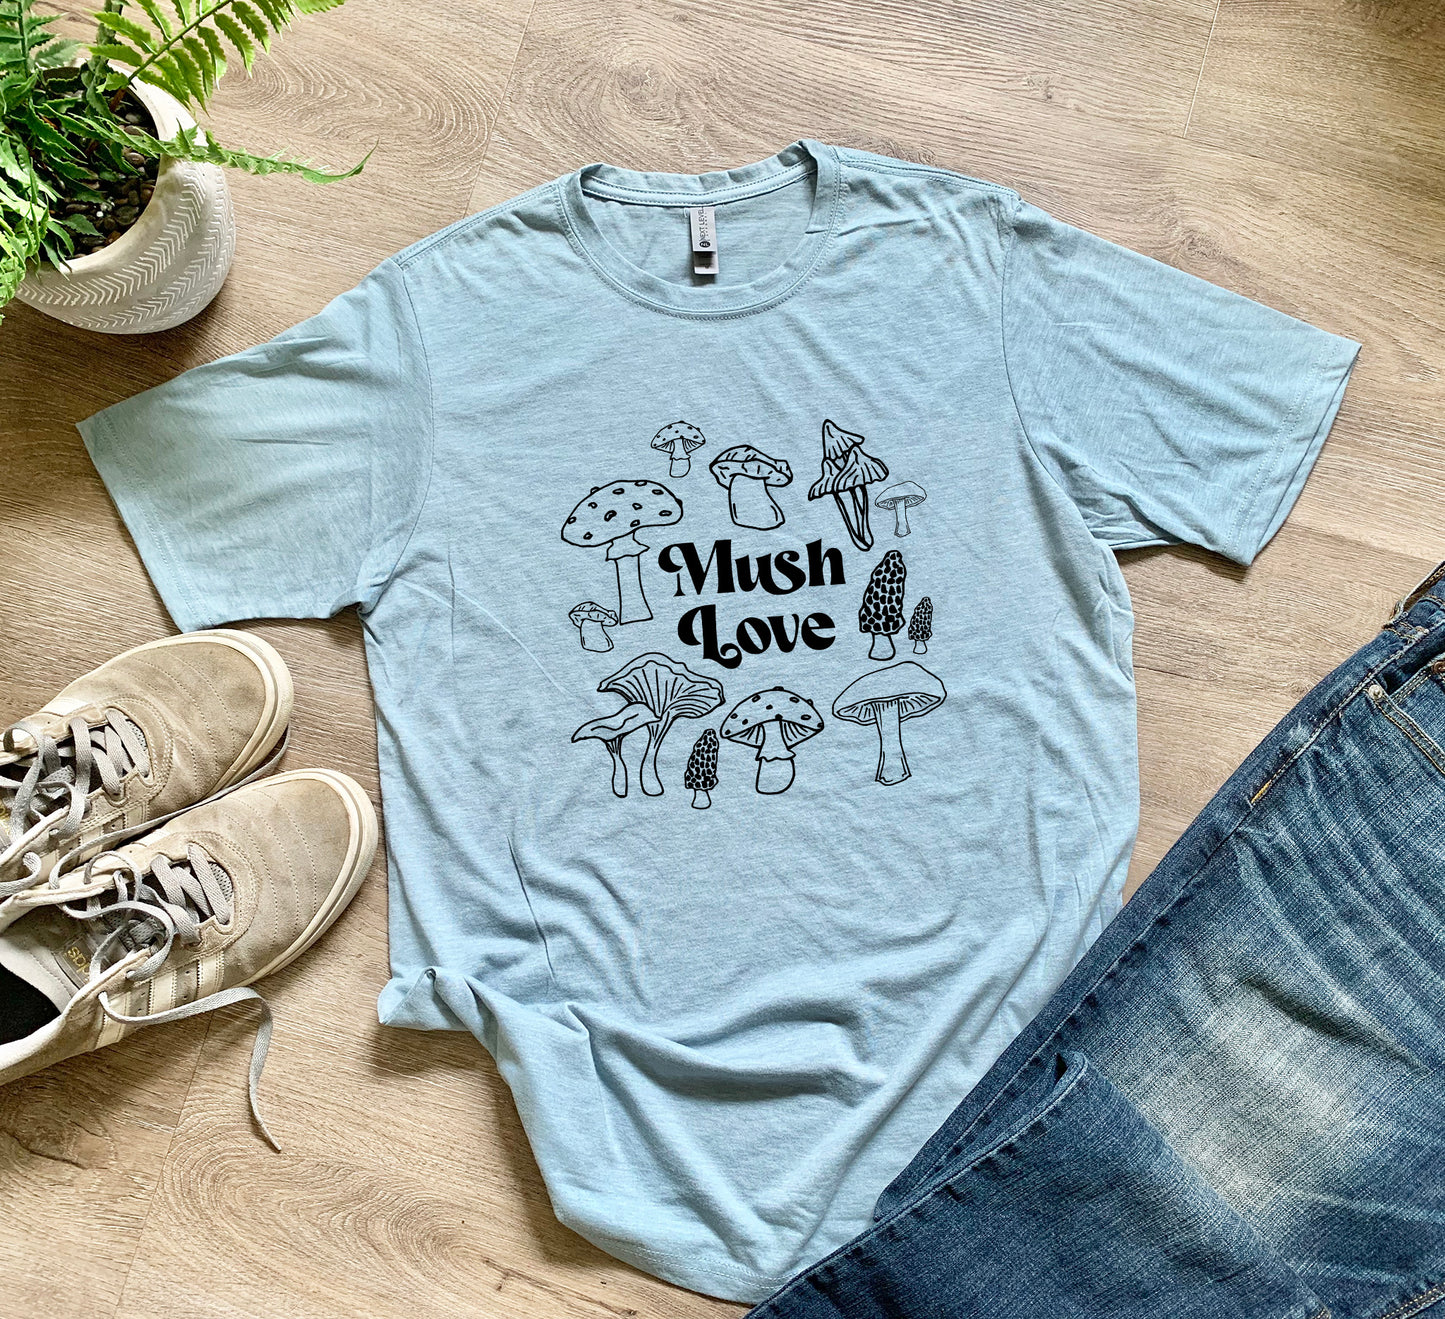 a t - shirt that says mush love surrounded by mushrooms